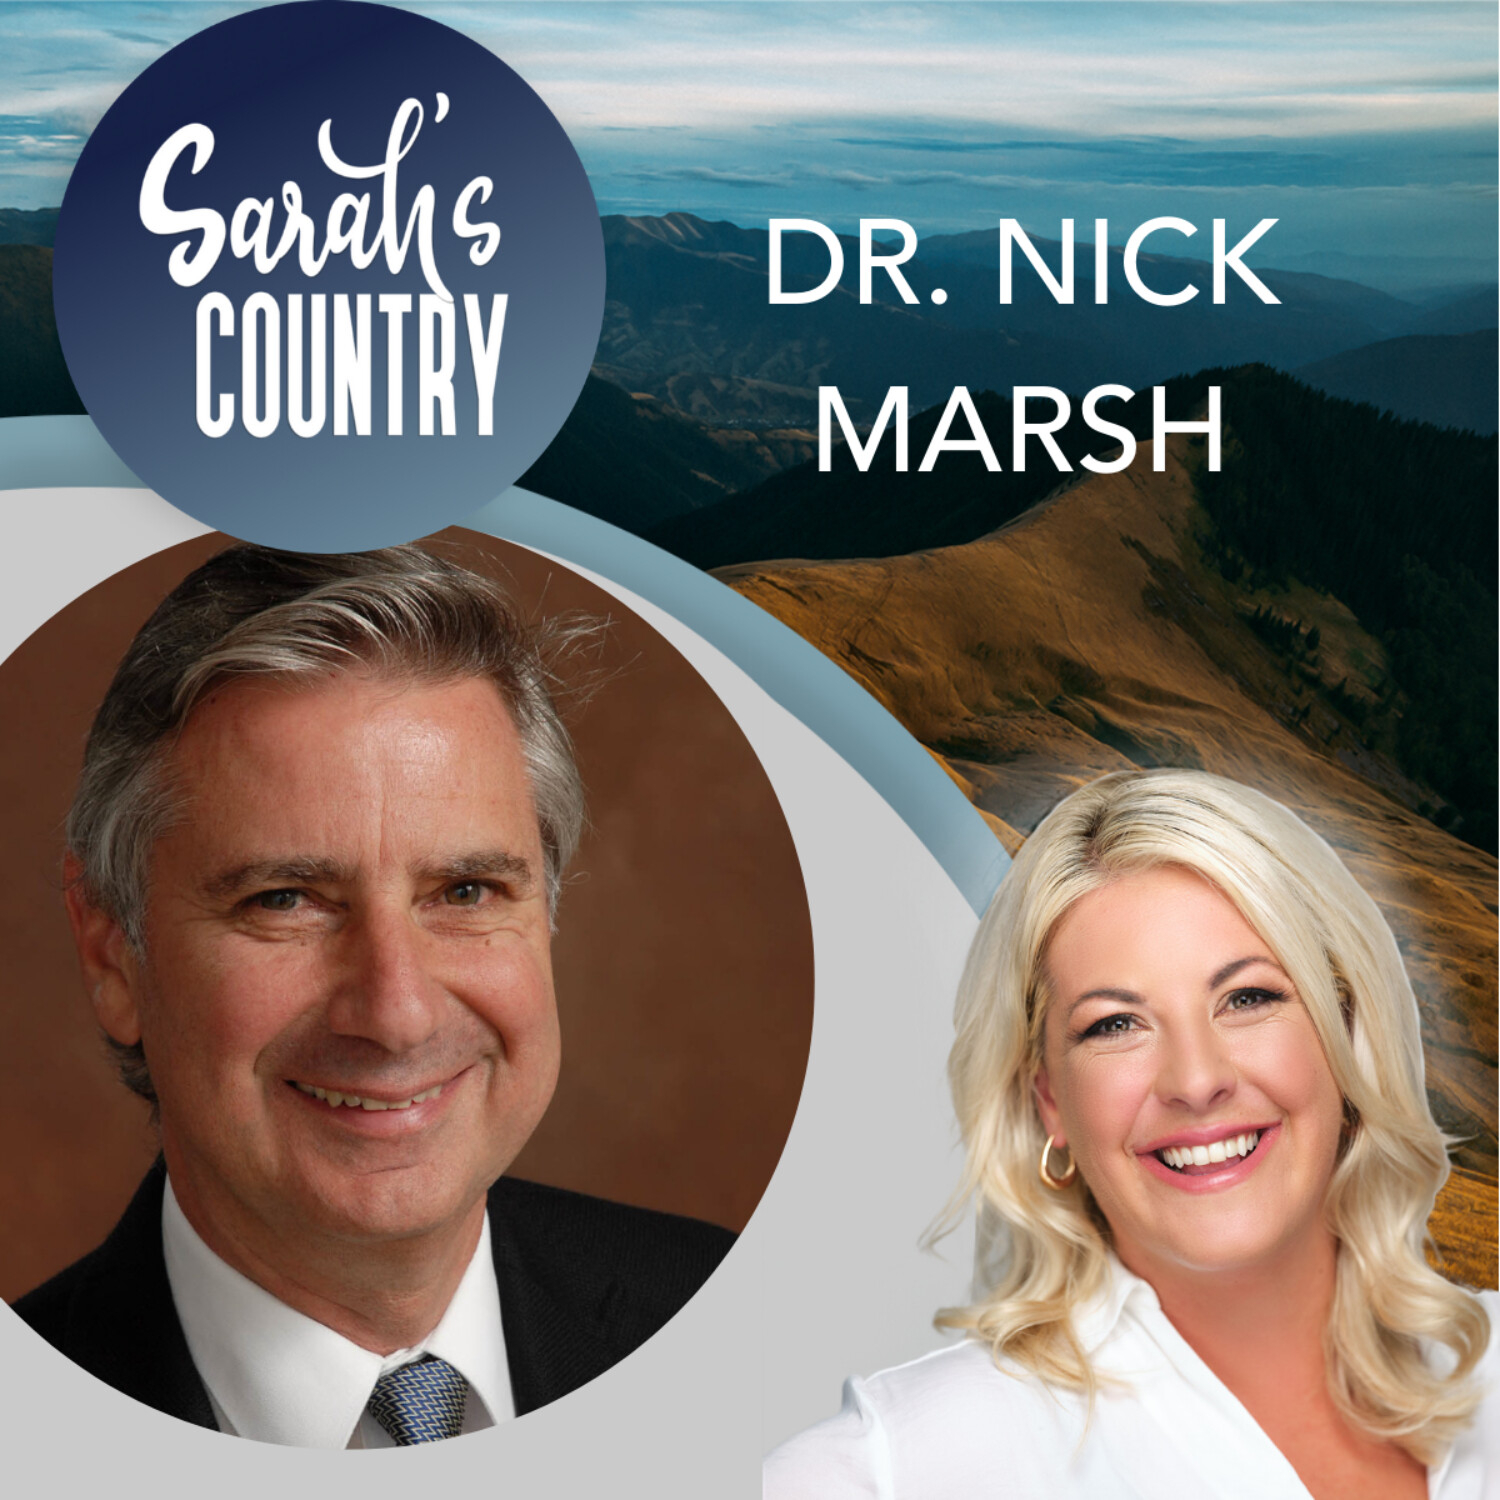 “Hemp could be billion-dollar industry if rules change” with Dr Nick Marsh